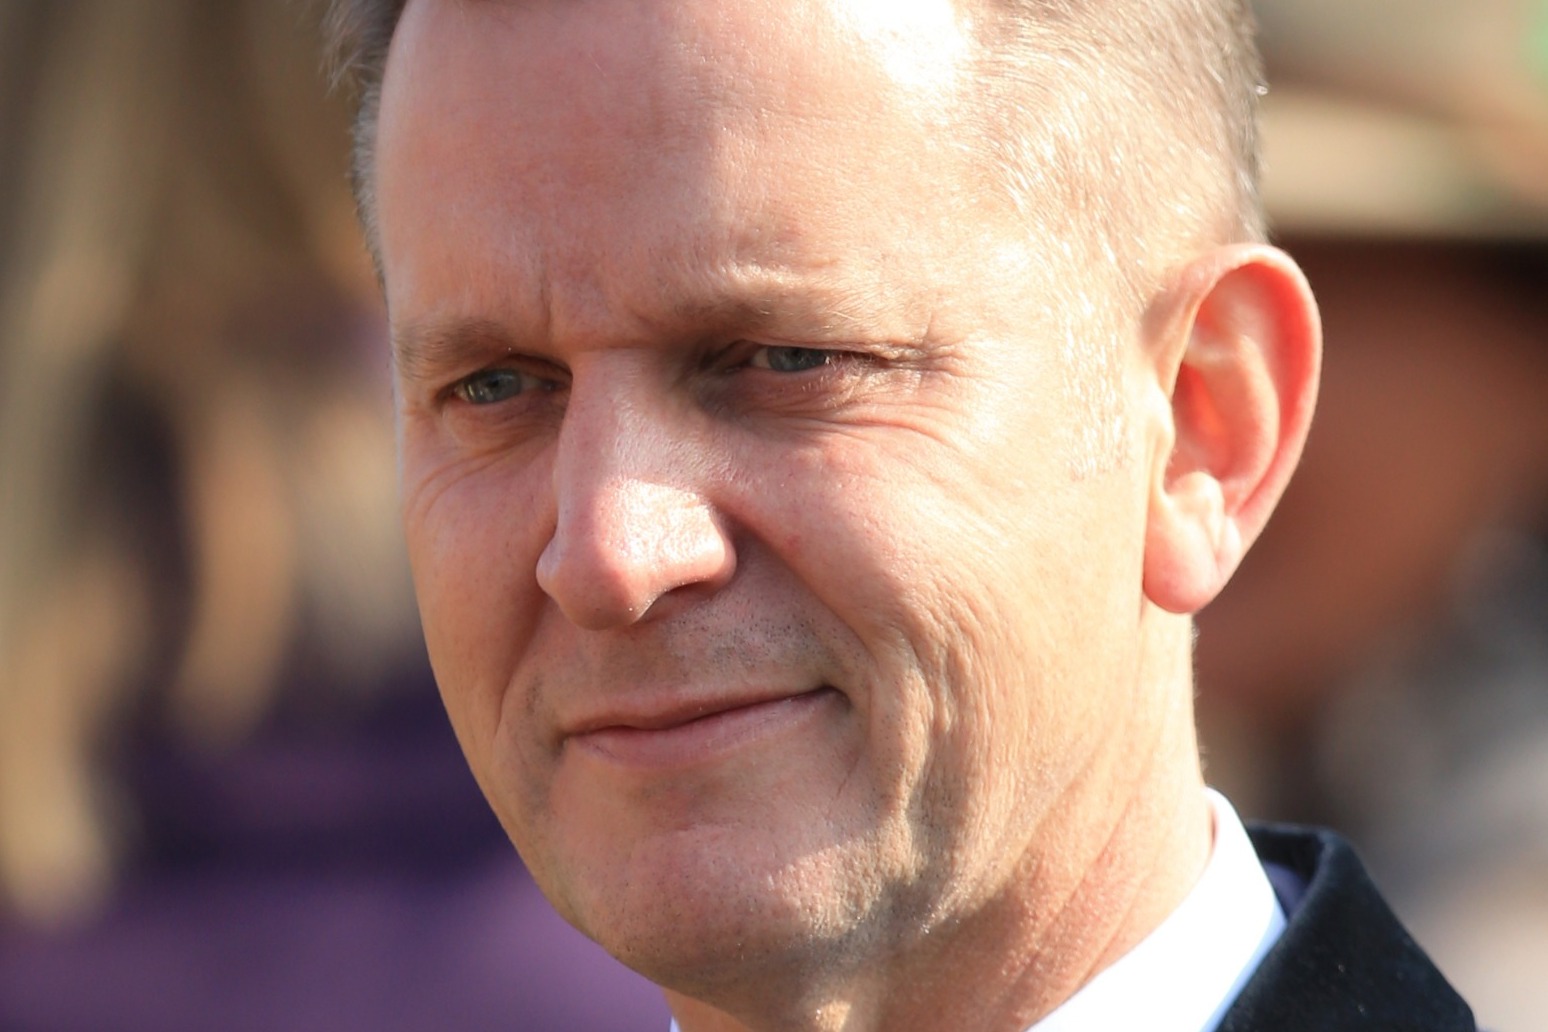 Jeremy Kyle may have played a part in the death of a guest on his TV show, according to a coroner 